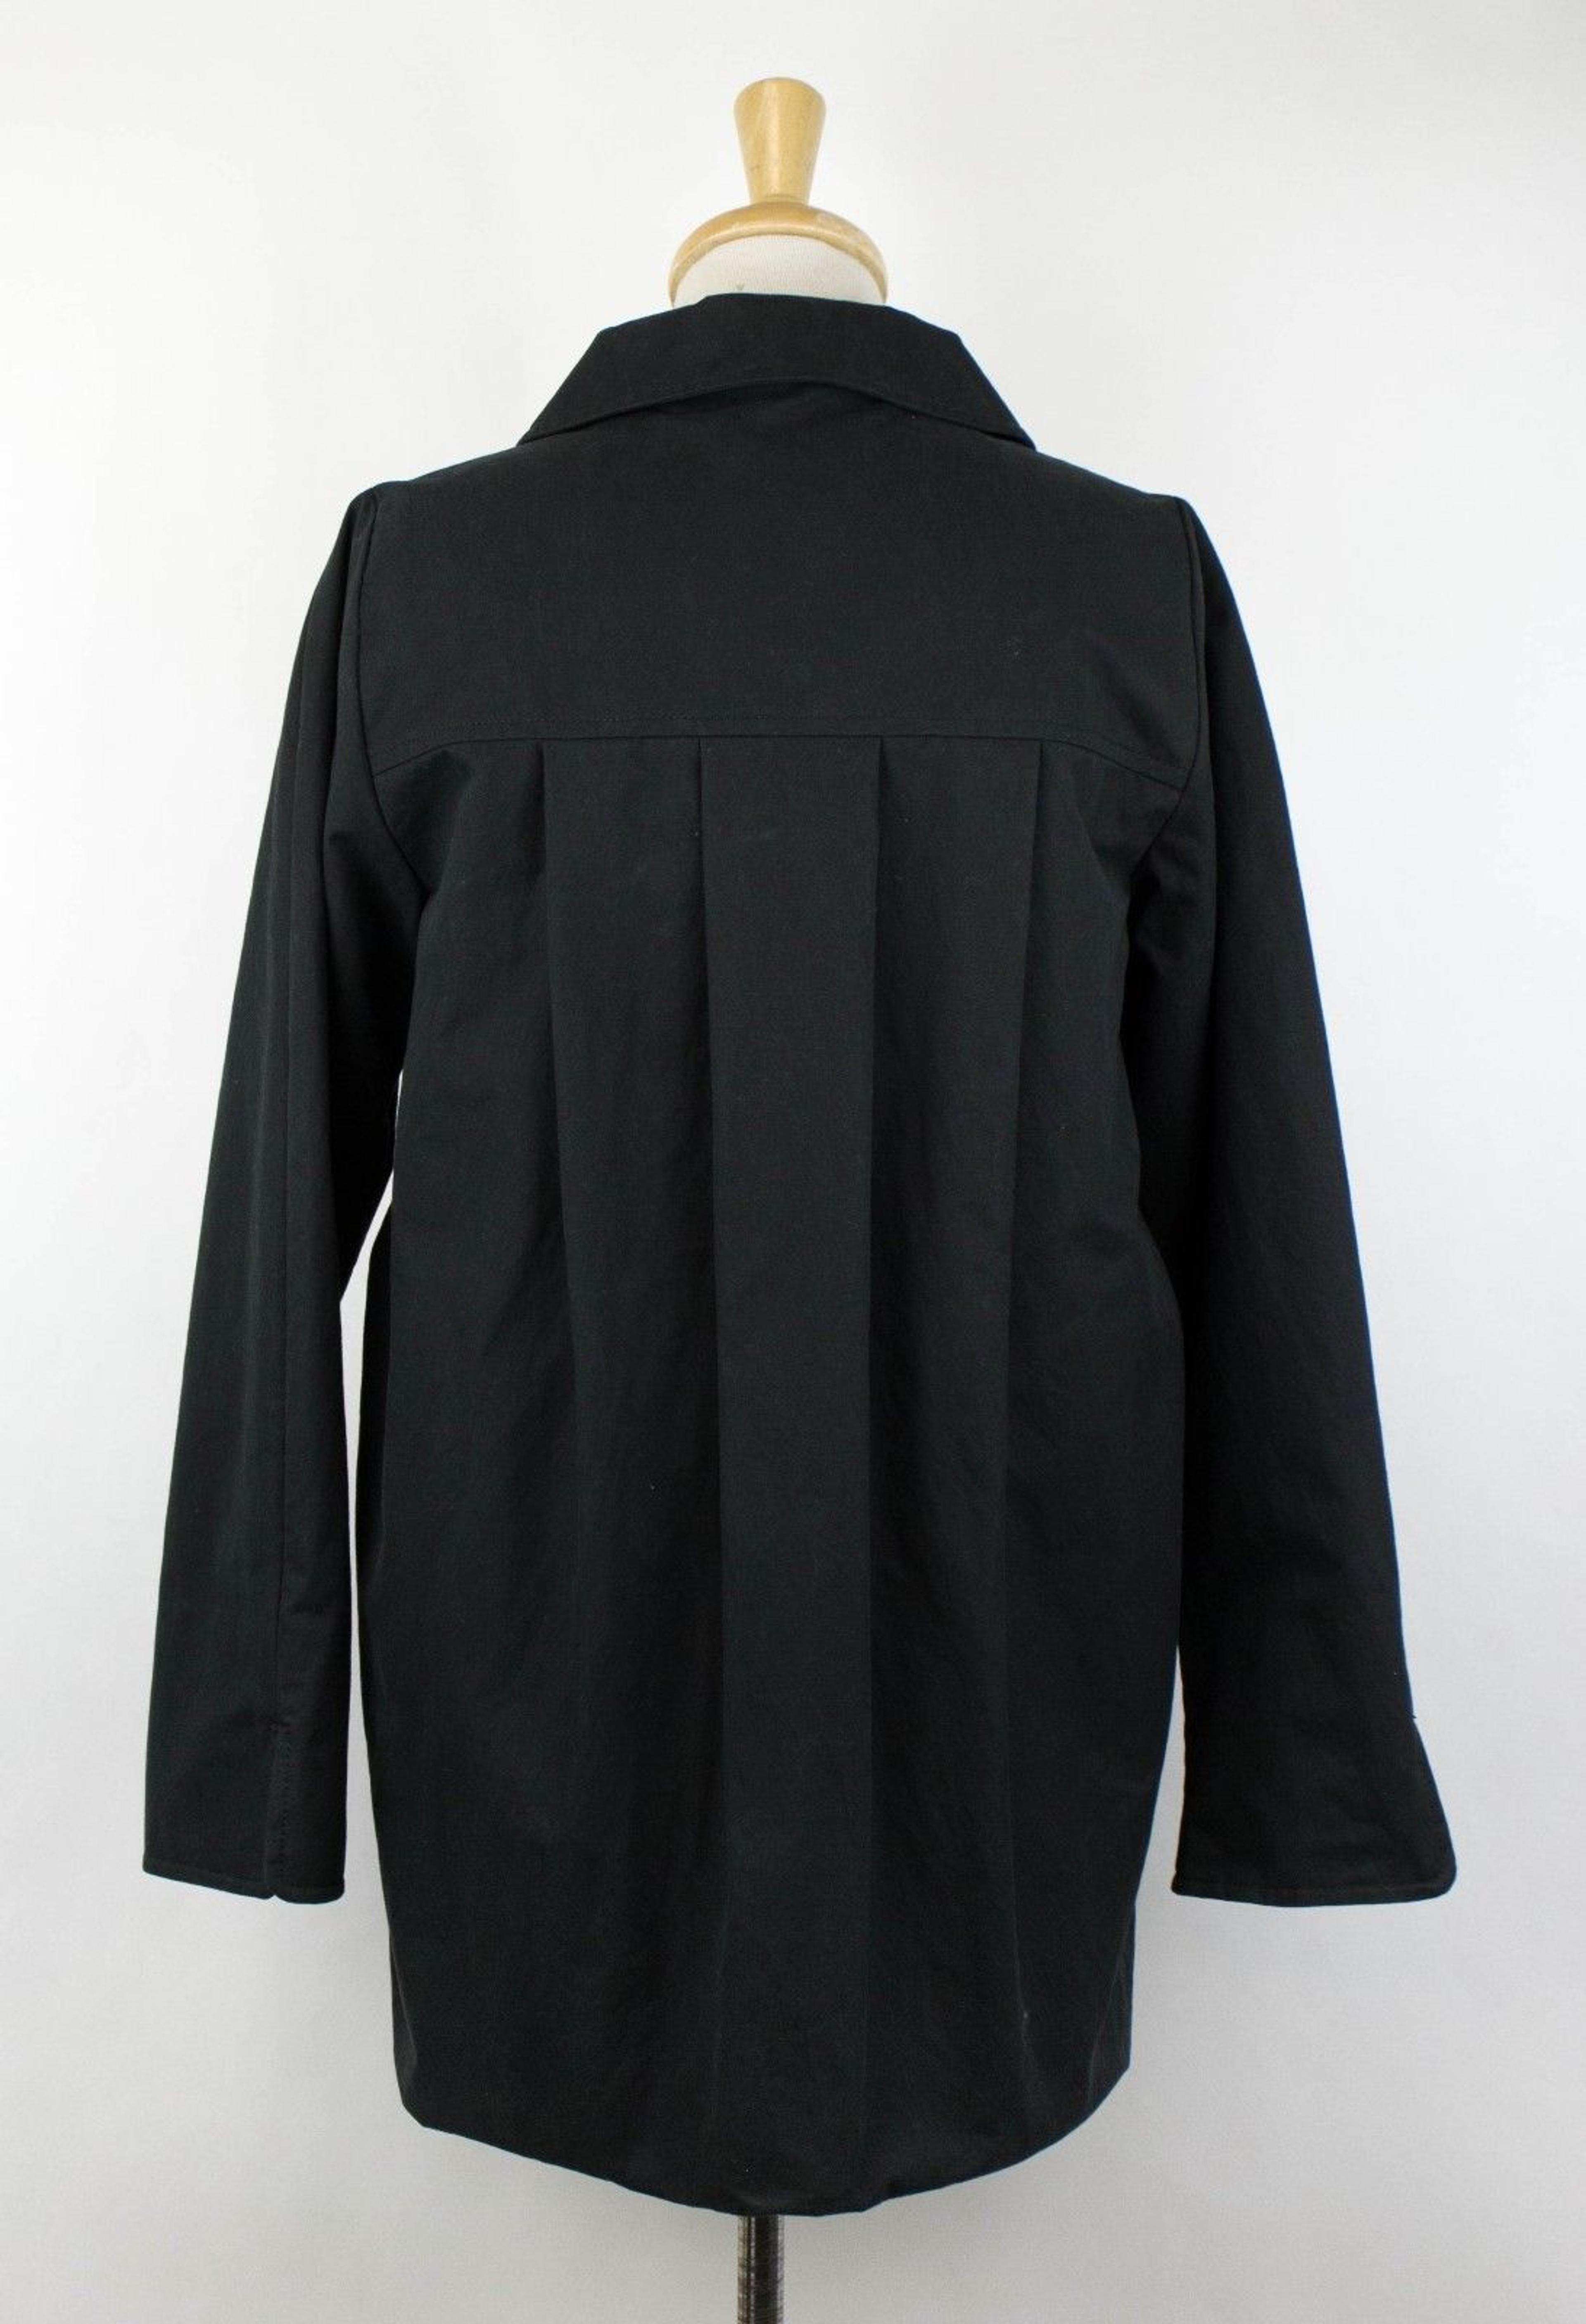 Alternate View 2 of MOSCHINO BOUTIQUE Women's Cuffed 3/4 Sleeve Black Jacket